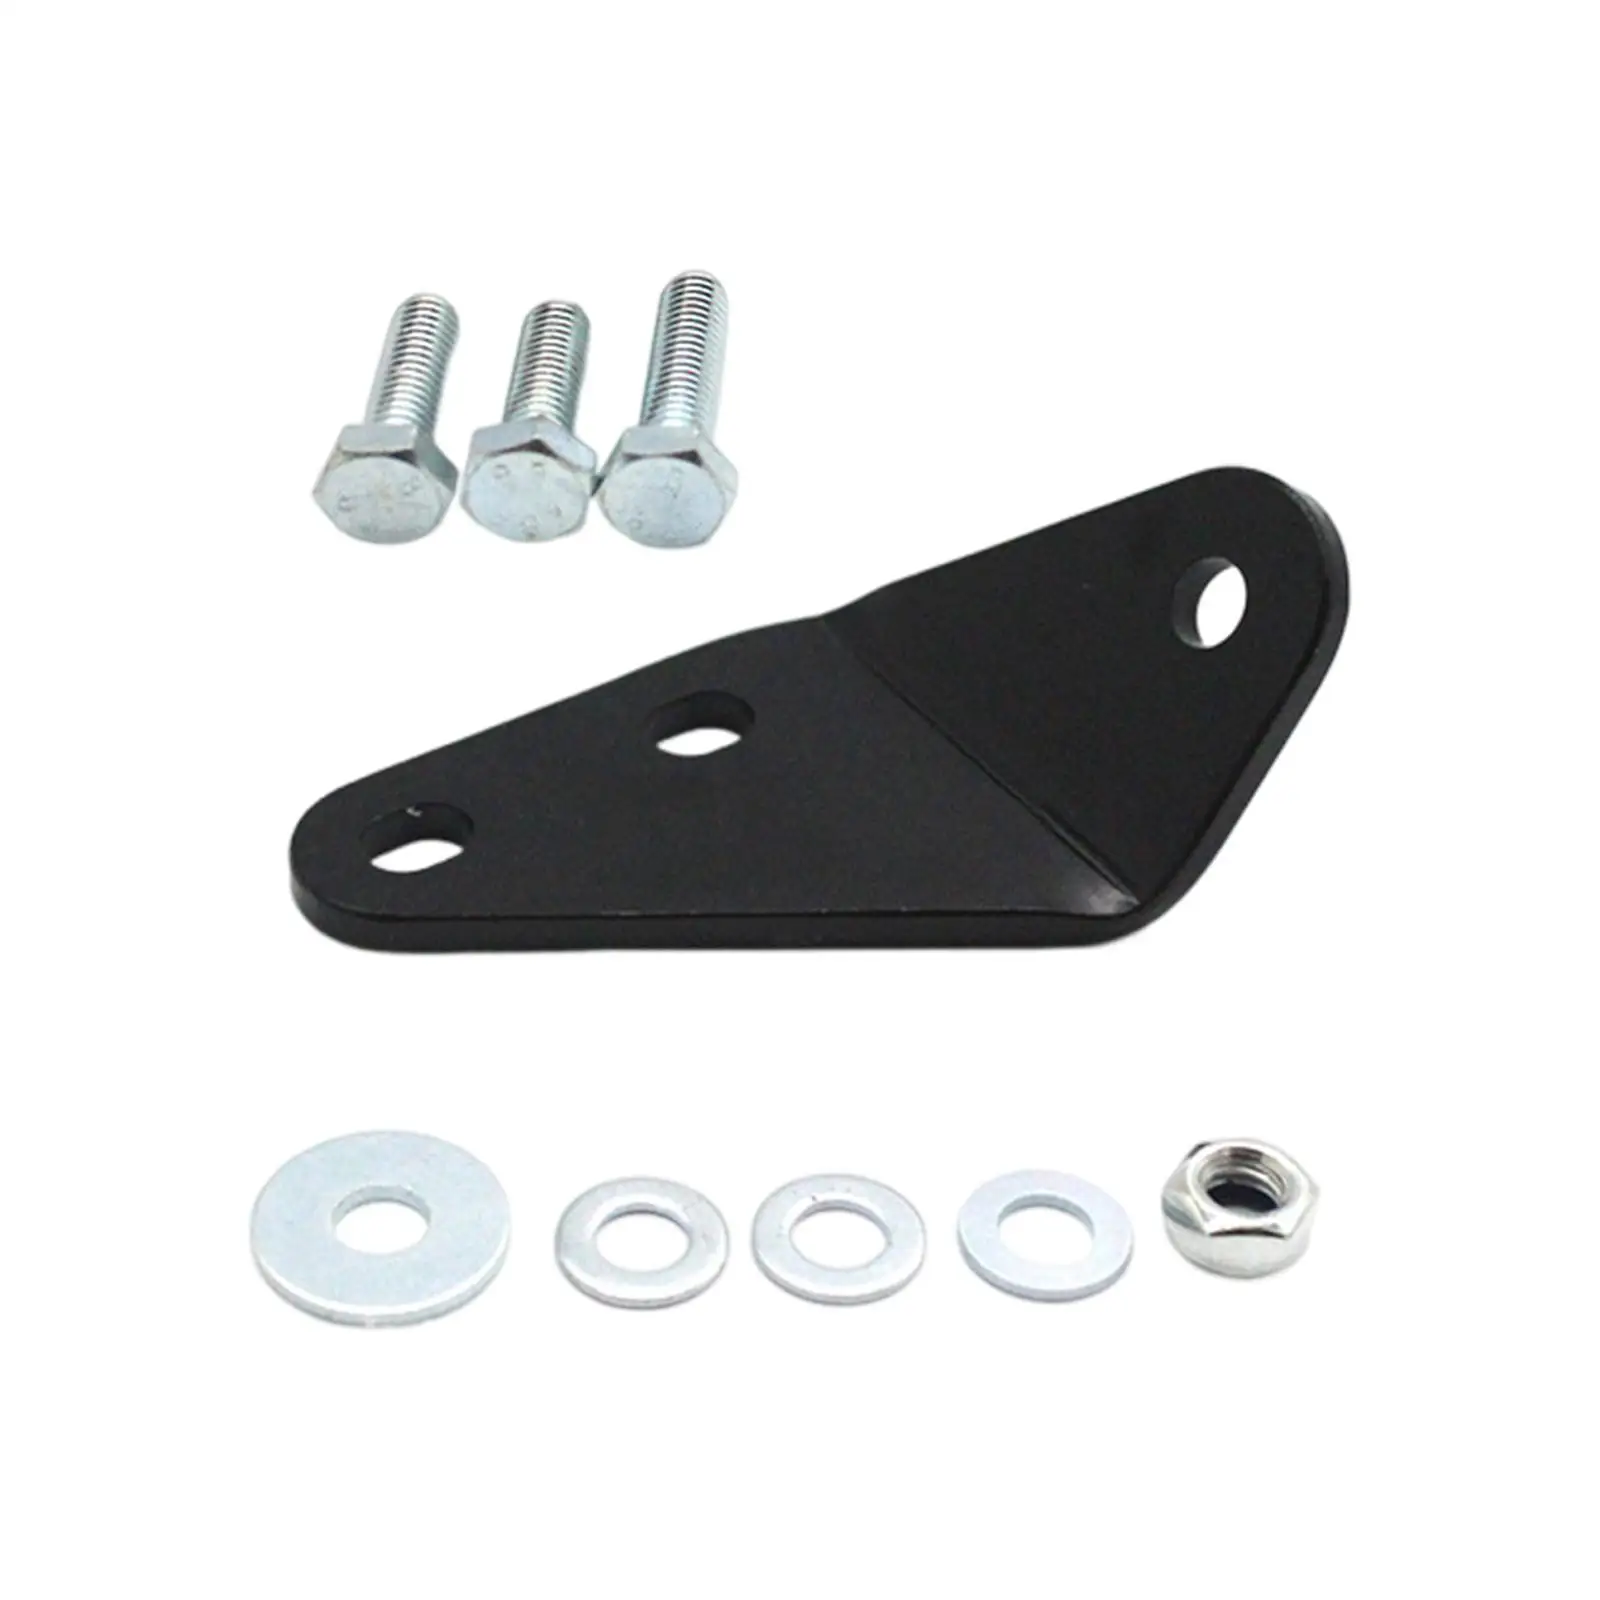 Clutch Pedal Bracket Easy Installation Directly Replace for VW T4 Transporter Multivan Caravelle Automotive Accessories